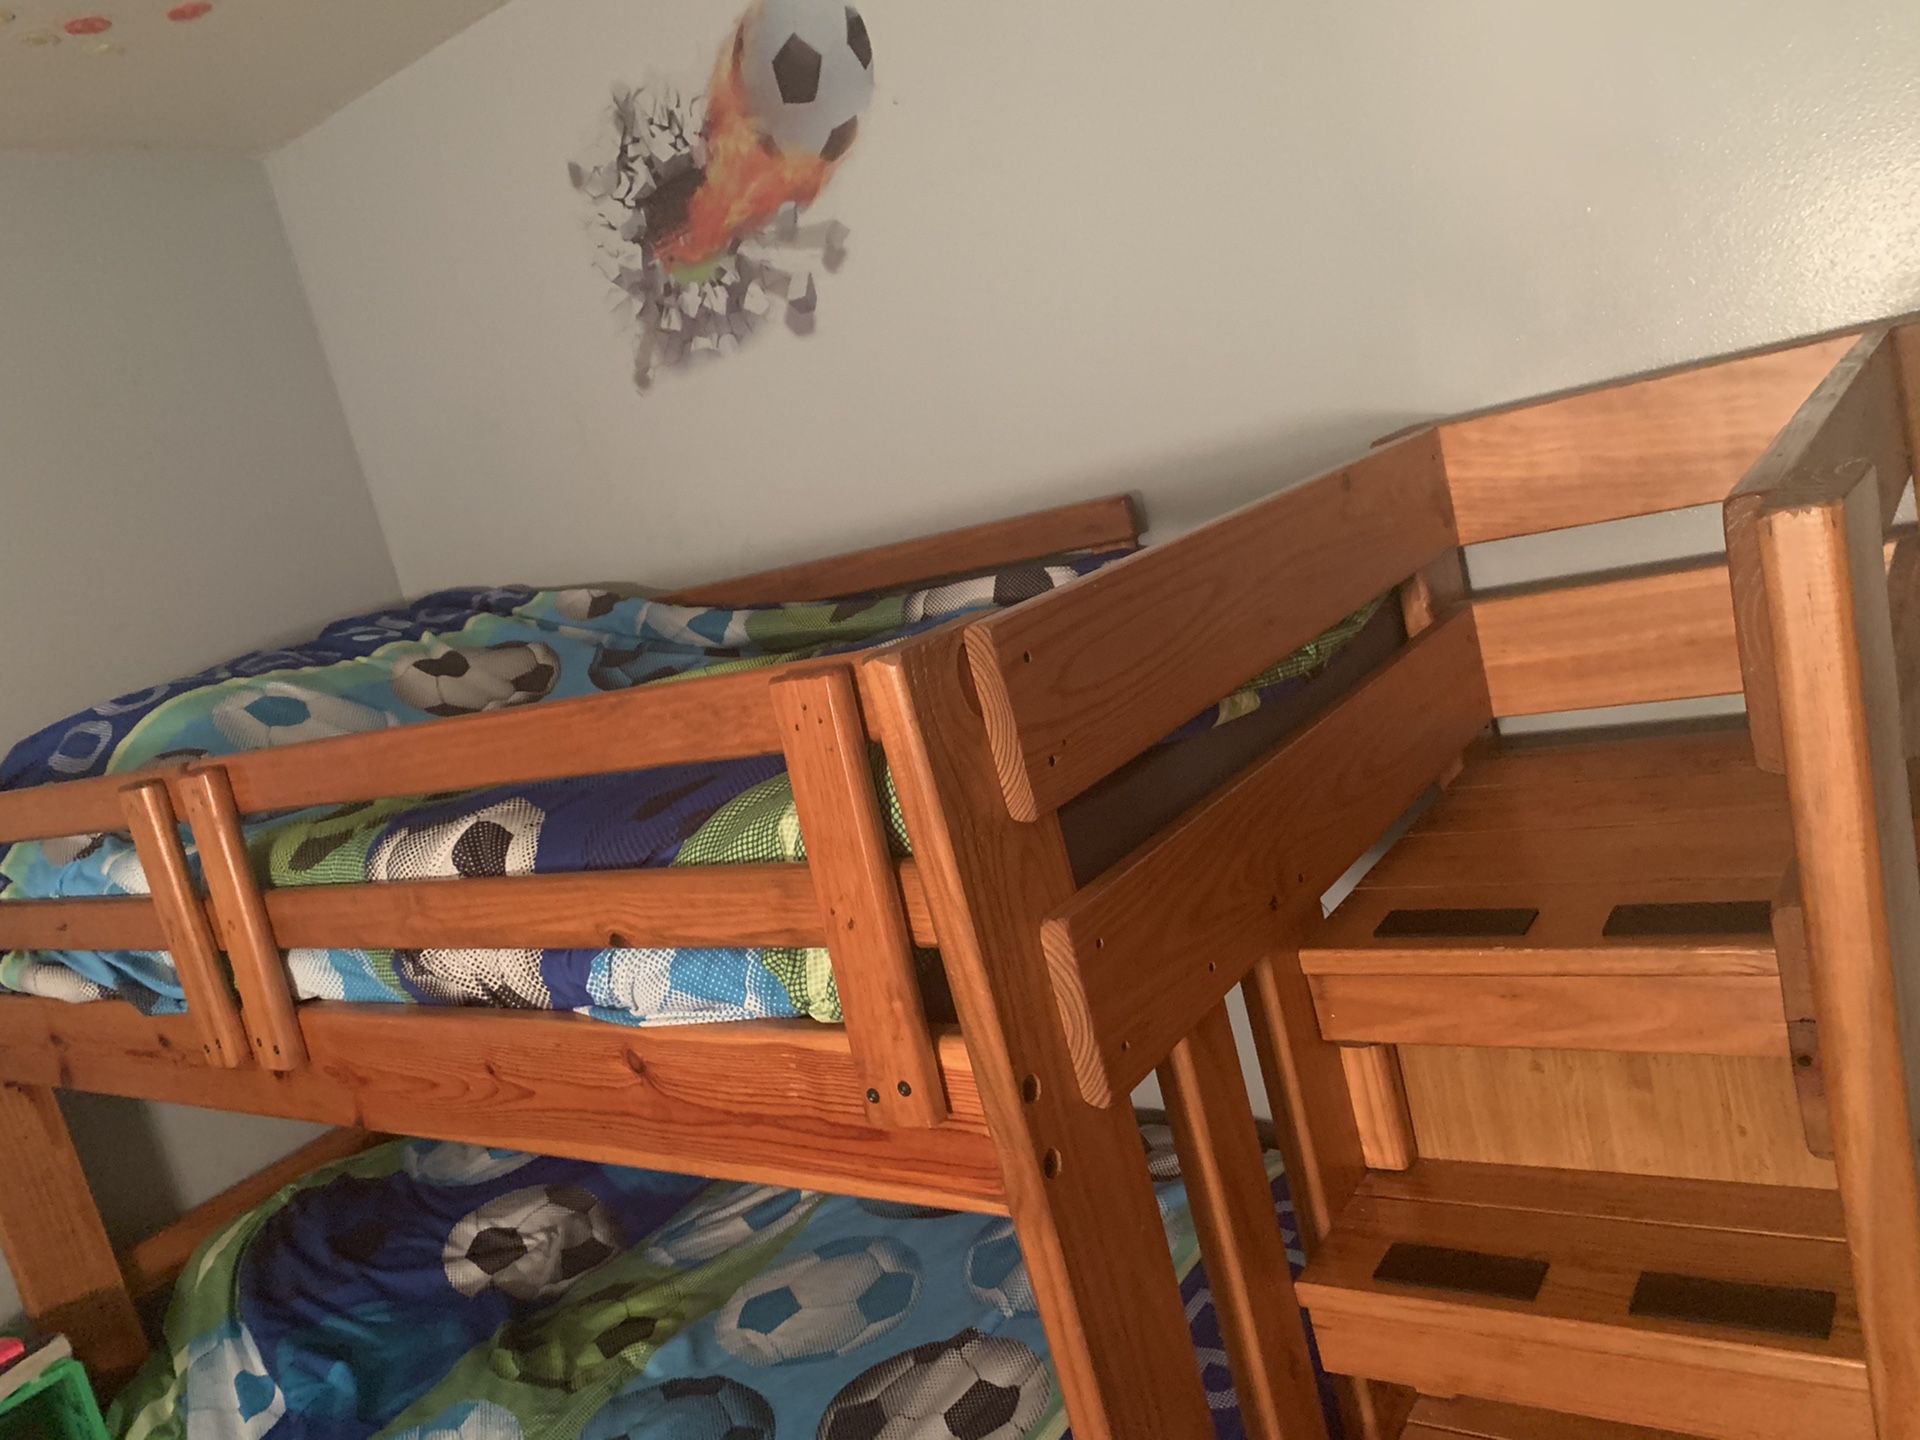 Bunk bed with drawers